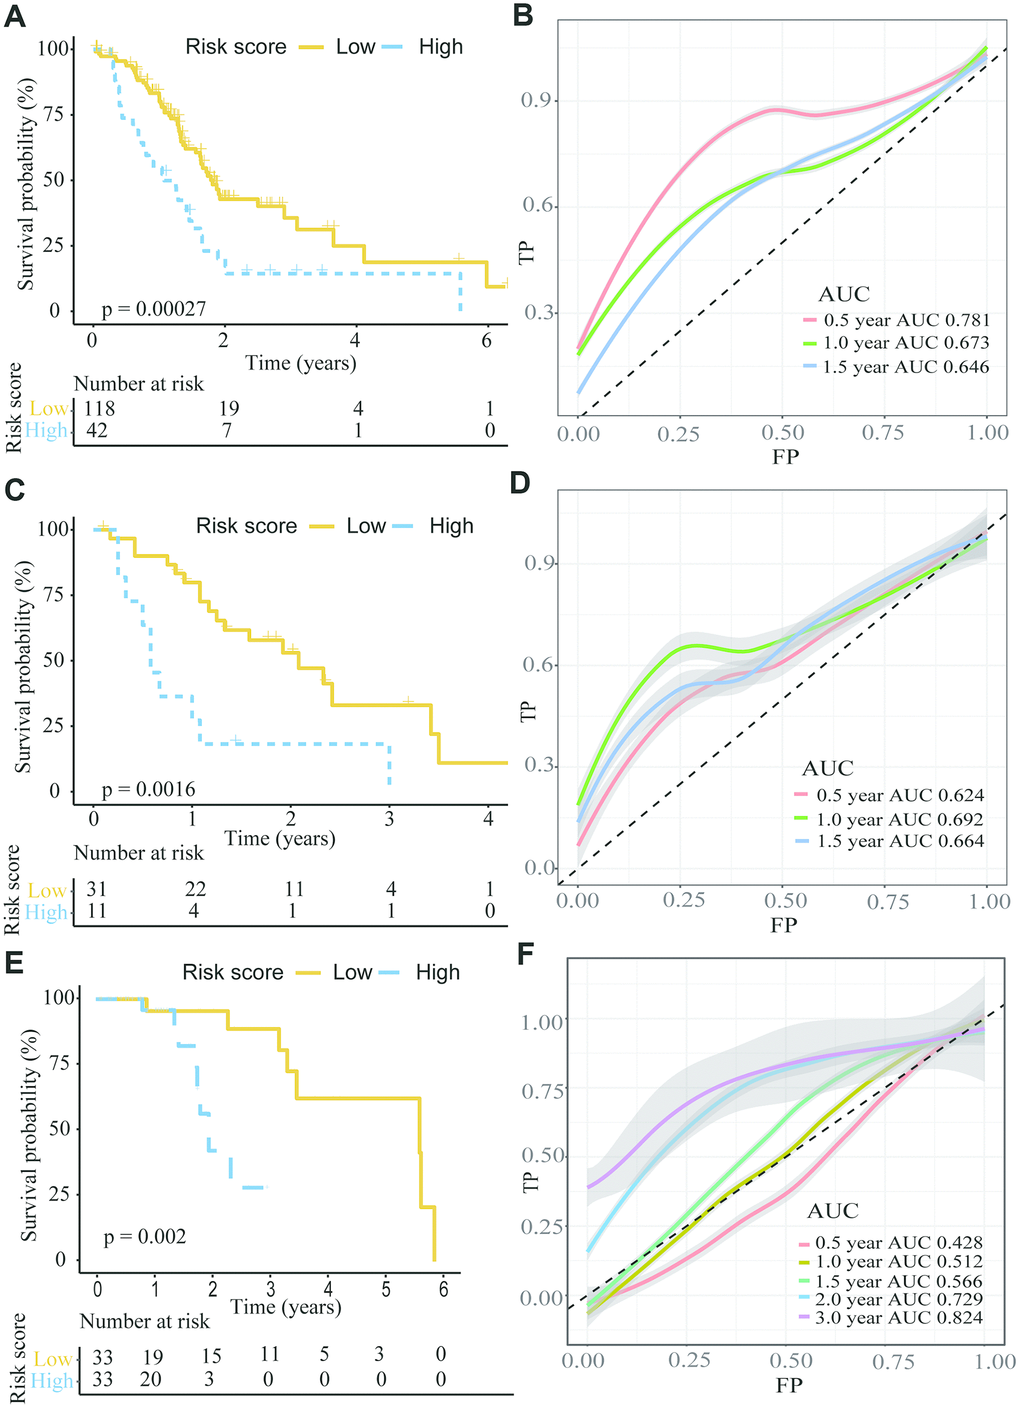 The K-M plot showed a lower overall survival in the high risk group compared to the low risk group divided by the optimal cut-off point. (A, B) K-M and time-dependent ROC curves for the prognostic model based on ANLN and HIST1H1C expression in the TCGA PC cohort. (C, D) K-M and time-dependent ROC curves for the prognostic model based on ANLN and HIST1H1C expression in the GSE28735. (E, F) K-M and time-dependent ROC curves for the prognostic model based on ANLN and HIST1H1C expression in the GSE62452.